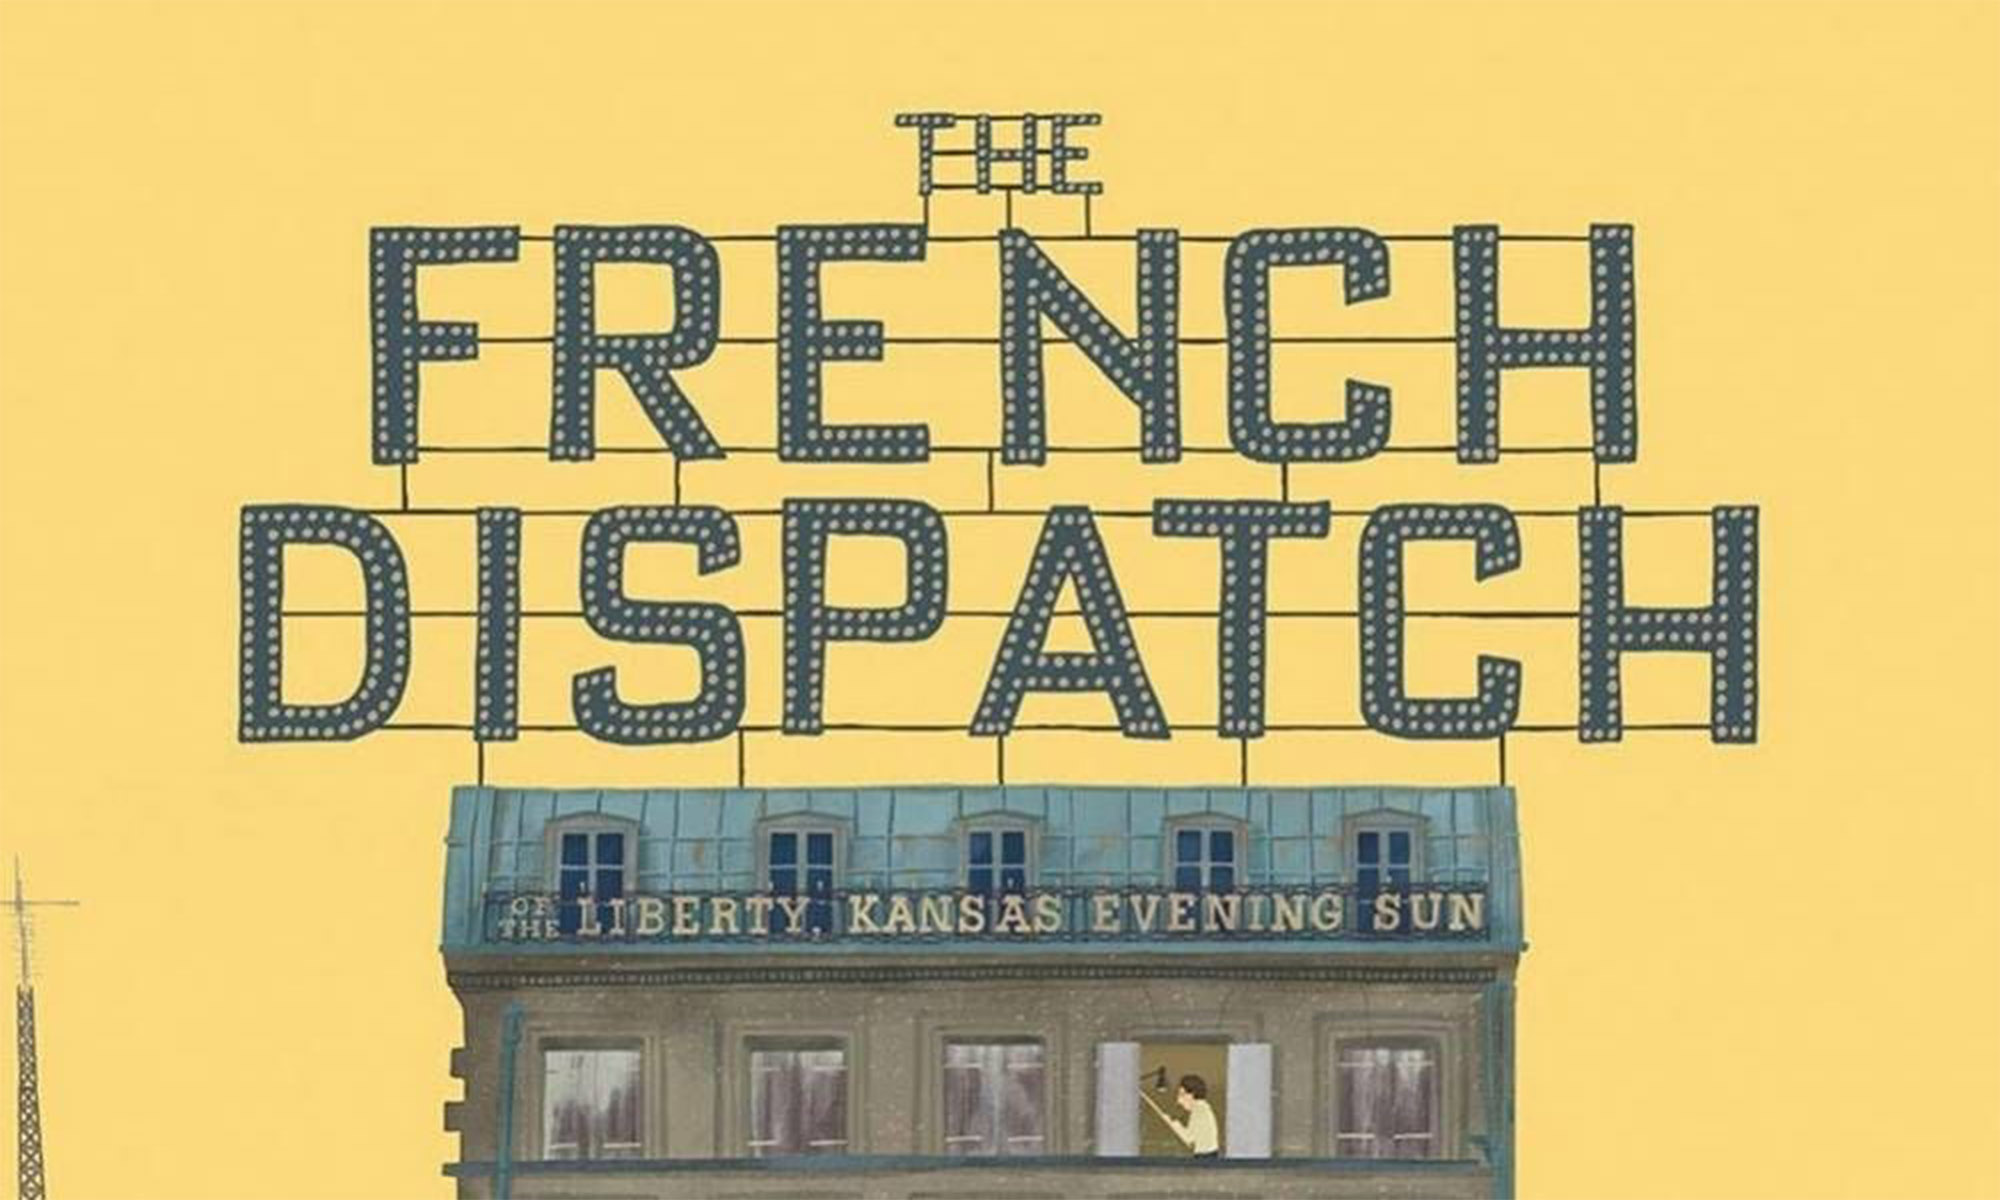 the french dispatch